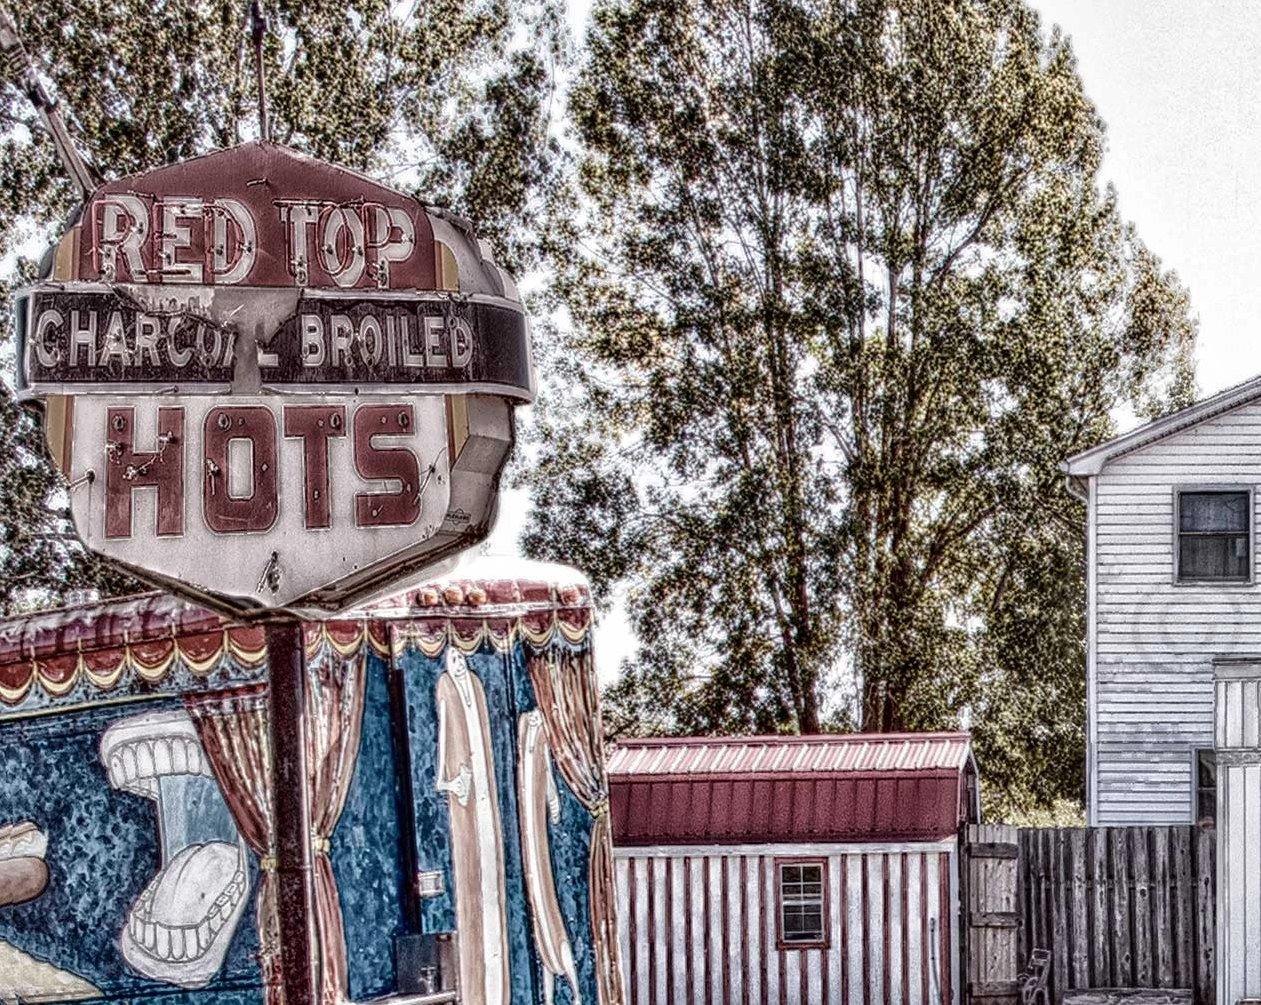 Red Top Hot Dog Stand on Route 5 in Buffalo NY Photograph WNY jmanphoto